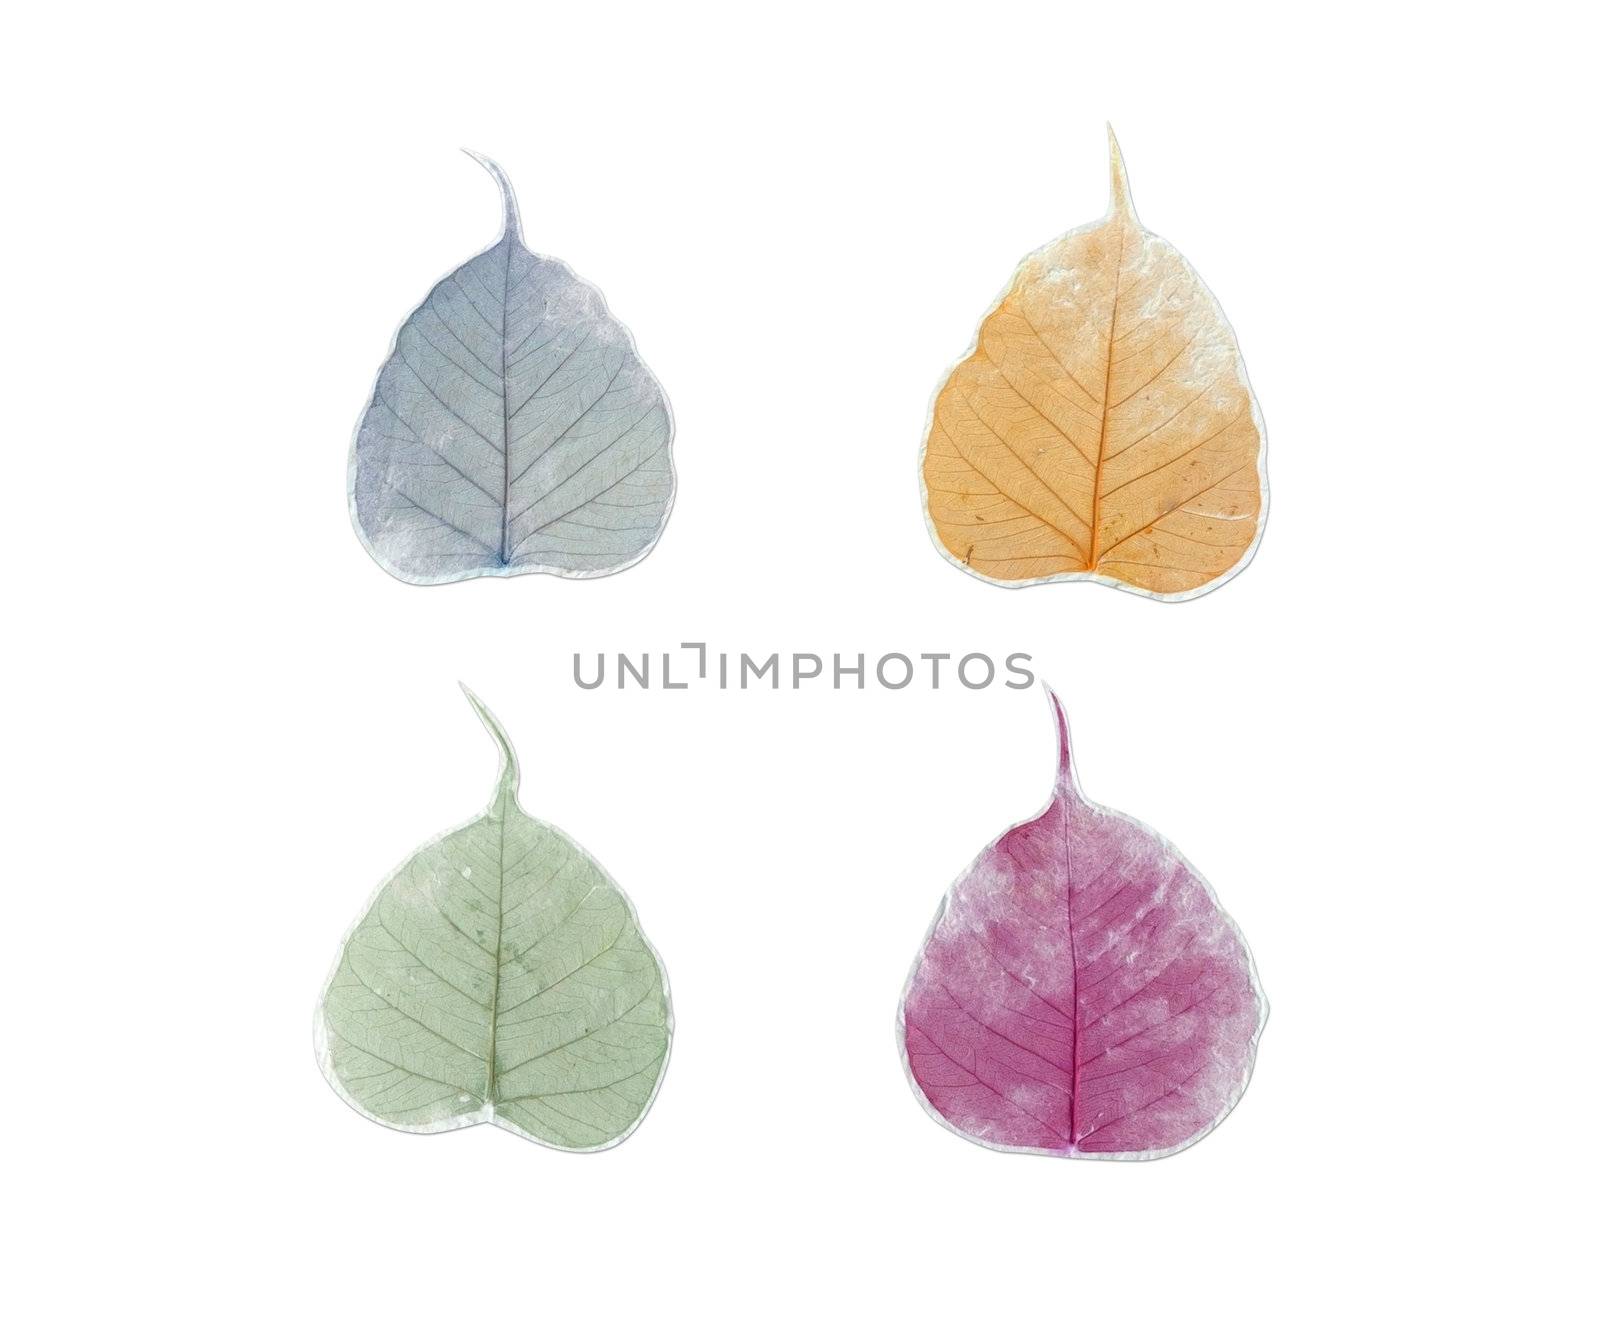 Tree leaves mulberry paper on white background.